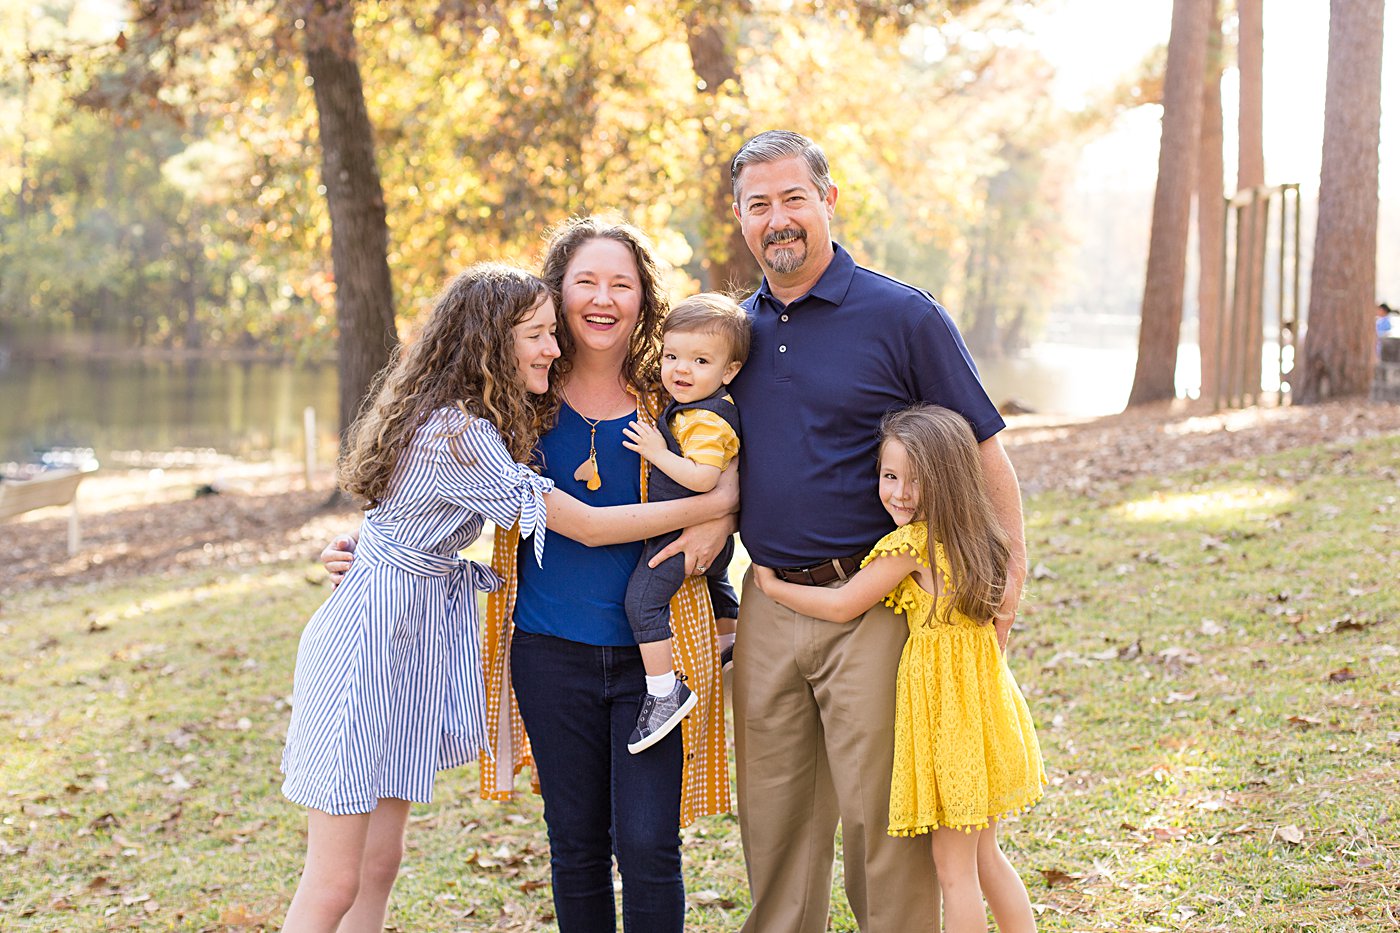 Smiling family at Gibson Pond Park in Lexington SC captured by Nicole Watford Photography